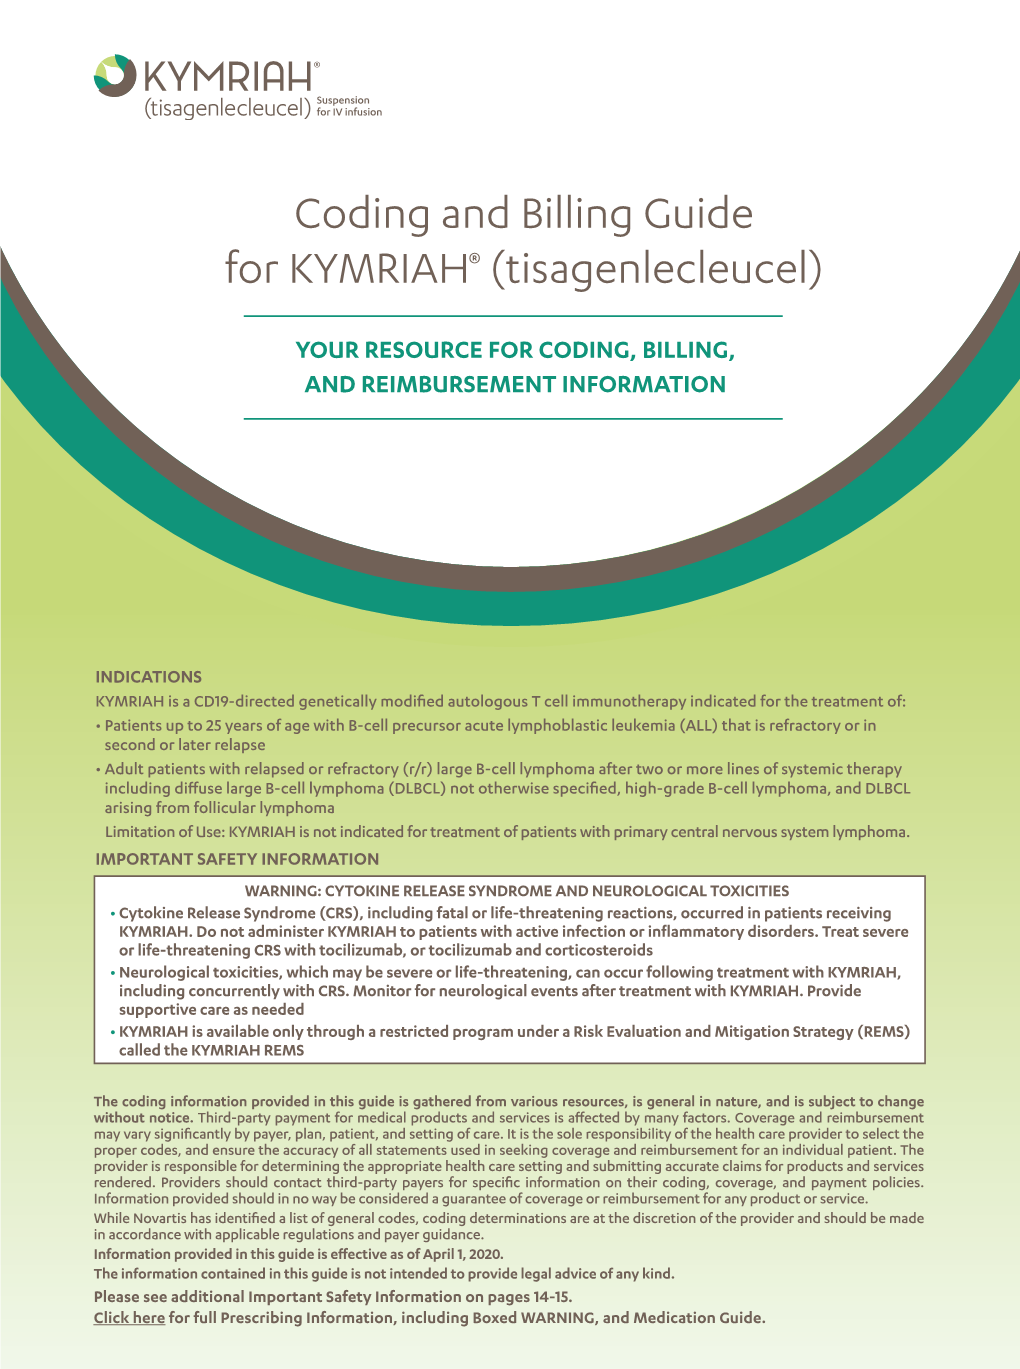 Coding and Billing Guide for KYMRIAH® (Tisagenlecleucel)